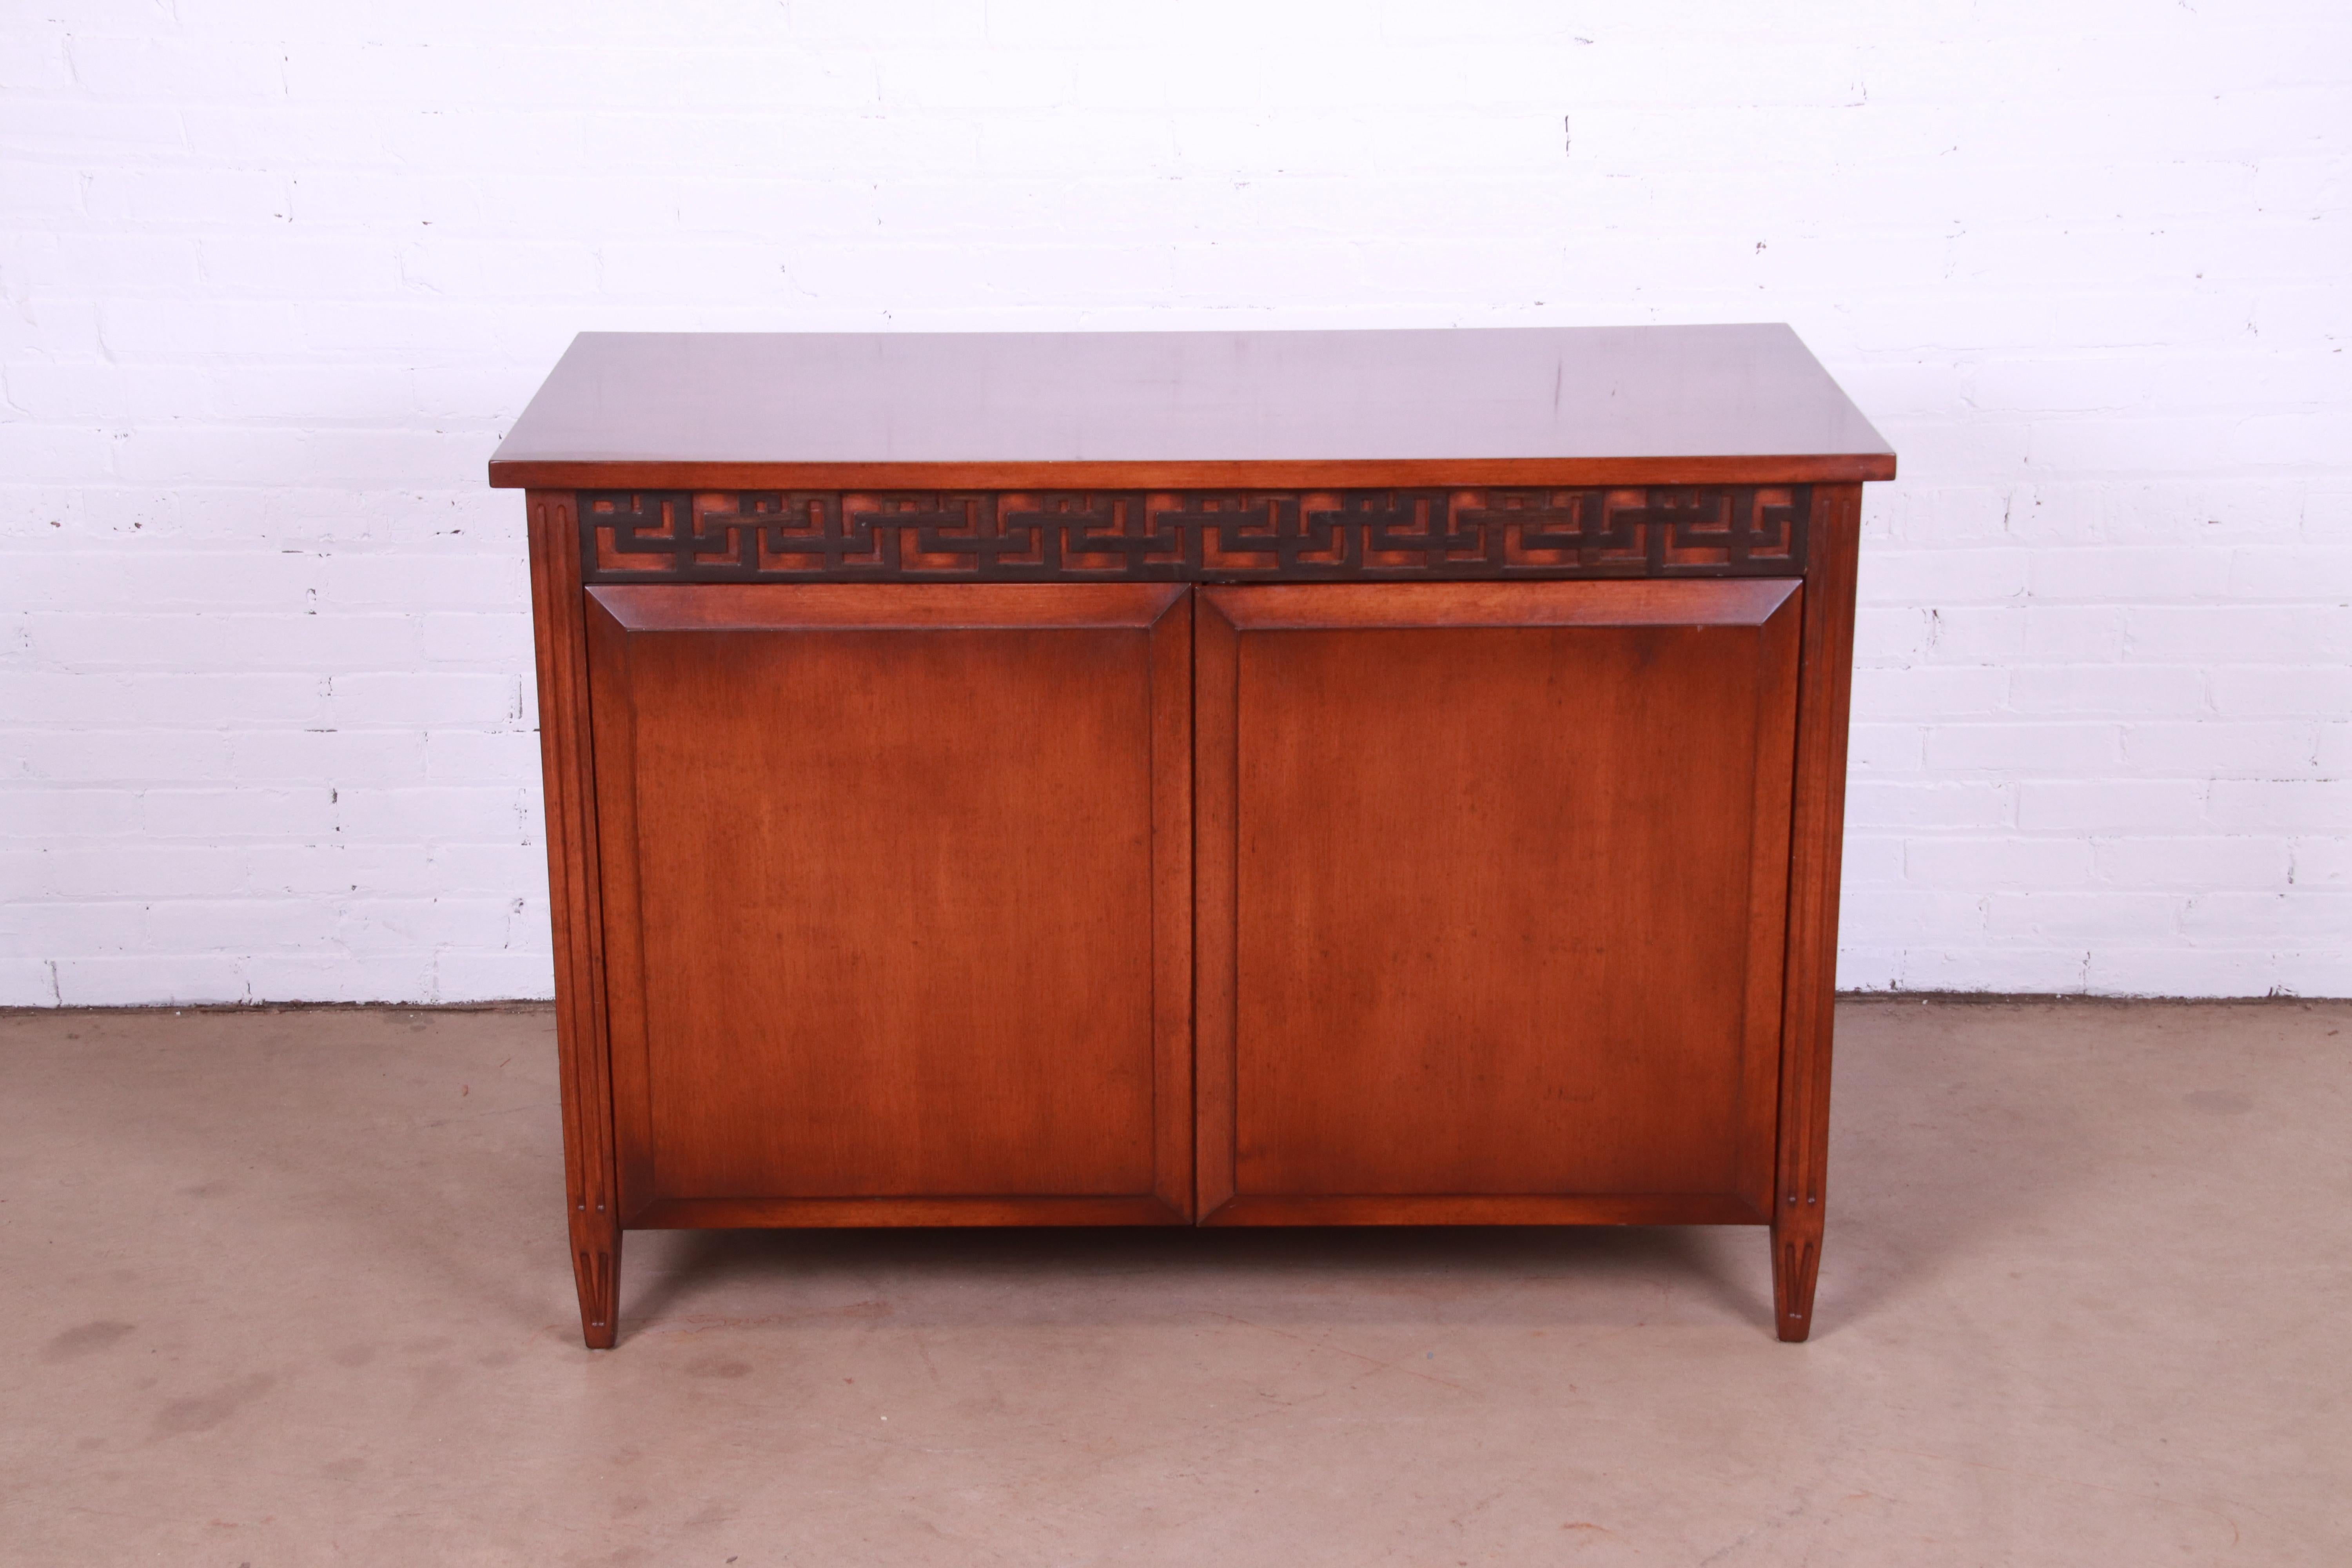 A gorgeous Regency style carved English walnut buffet server or bar cabinet

By Nancy Corzine

USA, circa late 20th century

Measures: 48